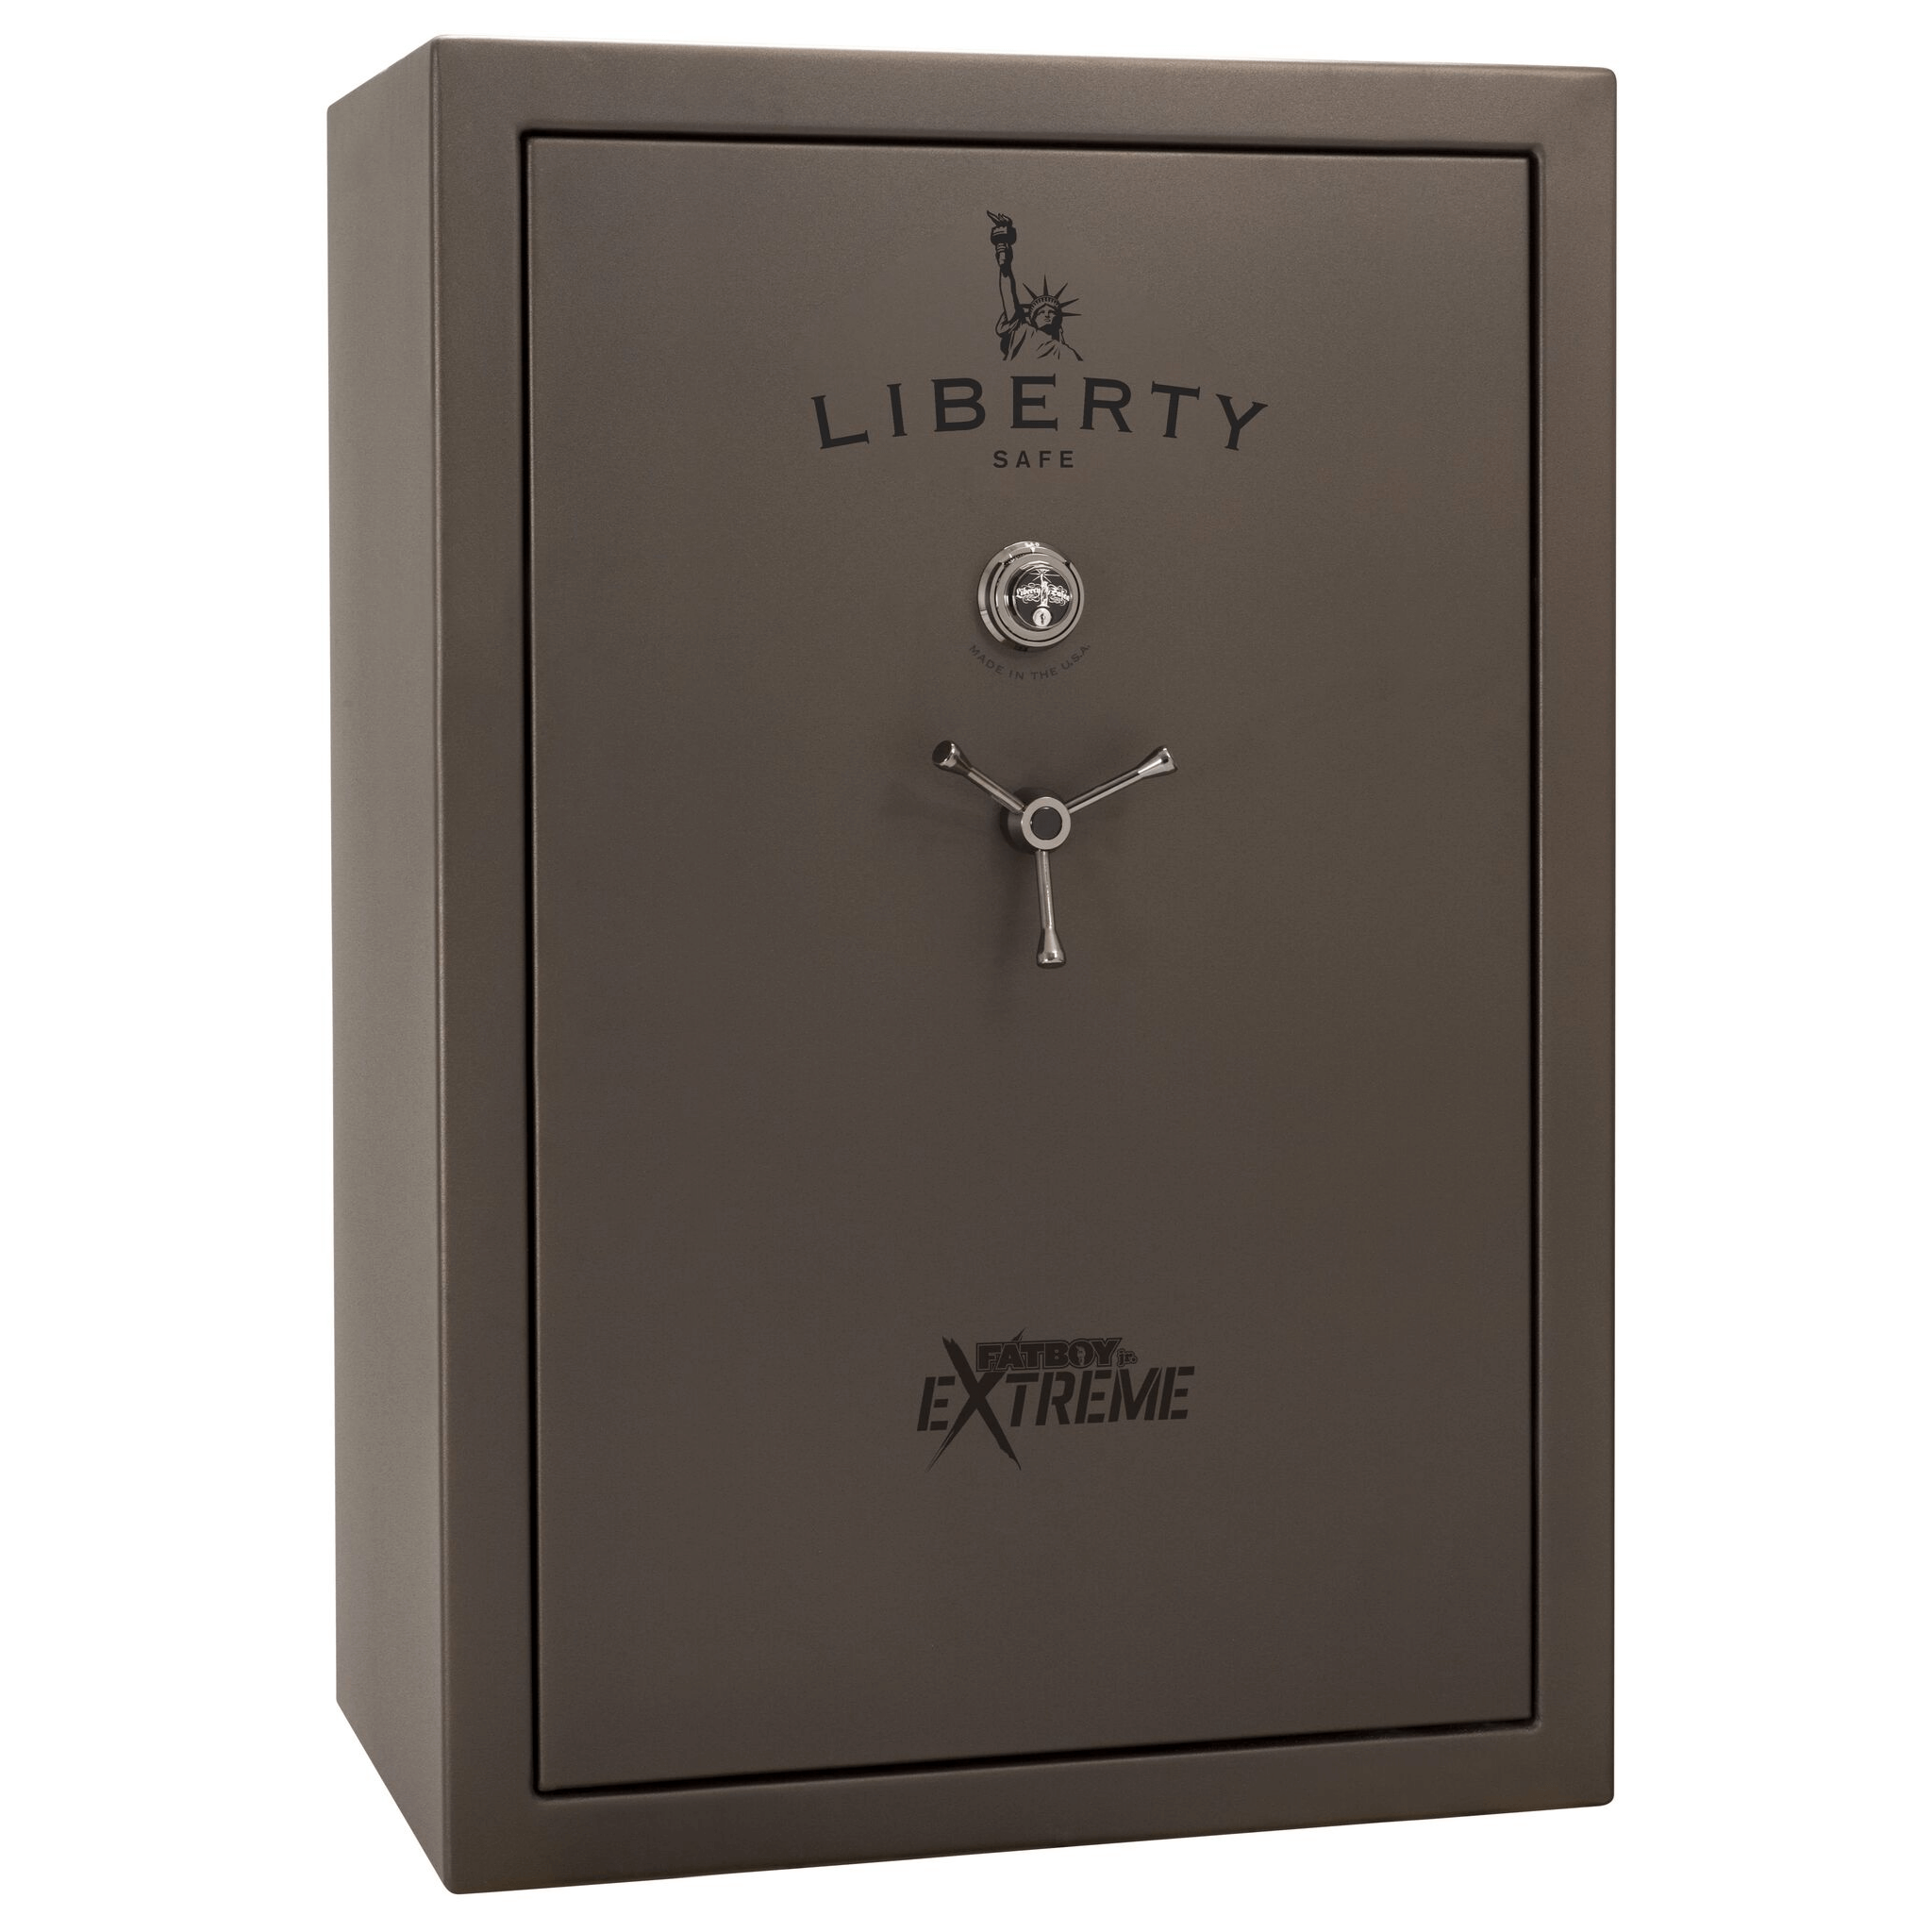 Fatboy Jr. Series | 48XT | Level 4 Security | 75 Minute Fire Protection | Dimensions: 60.5"(H) x 42"(W) x 22"(D) | Up to 48 Long Guns | Bronze Textured | Mechanical Lock